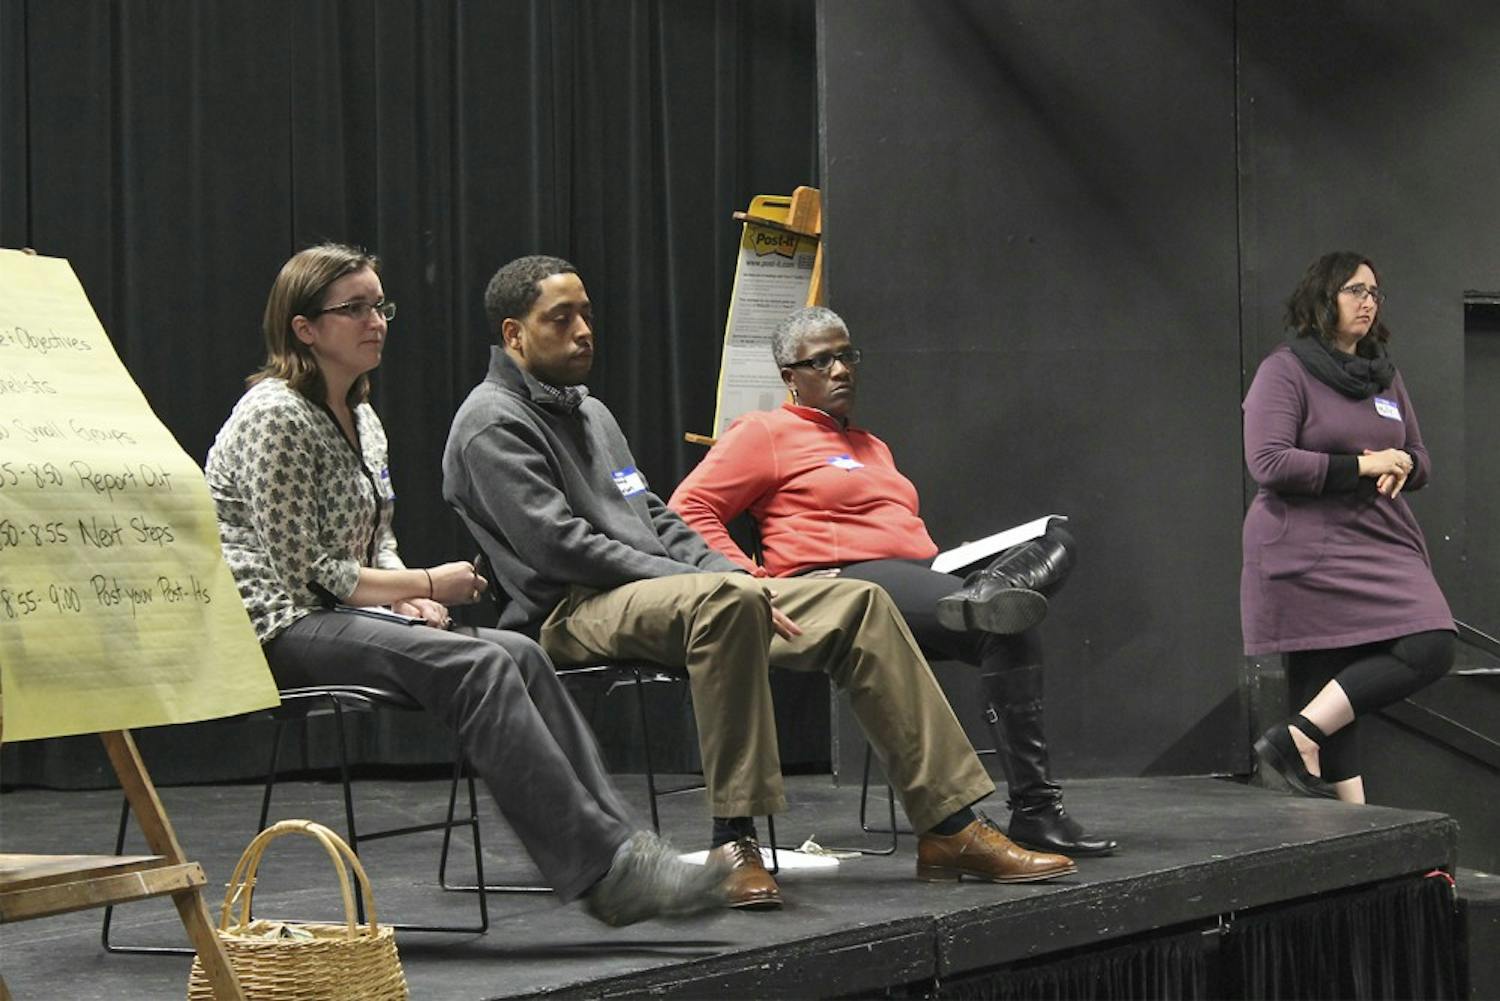 Chapel Hill citizens met on Wednesday at the ArtsCenter to open a dialogue about homelessness in the town.